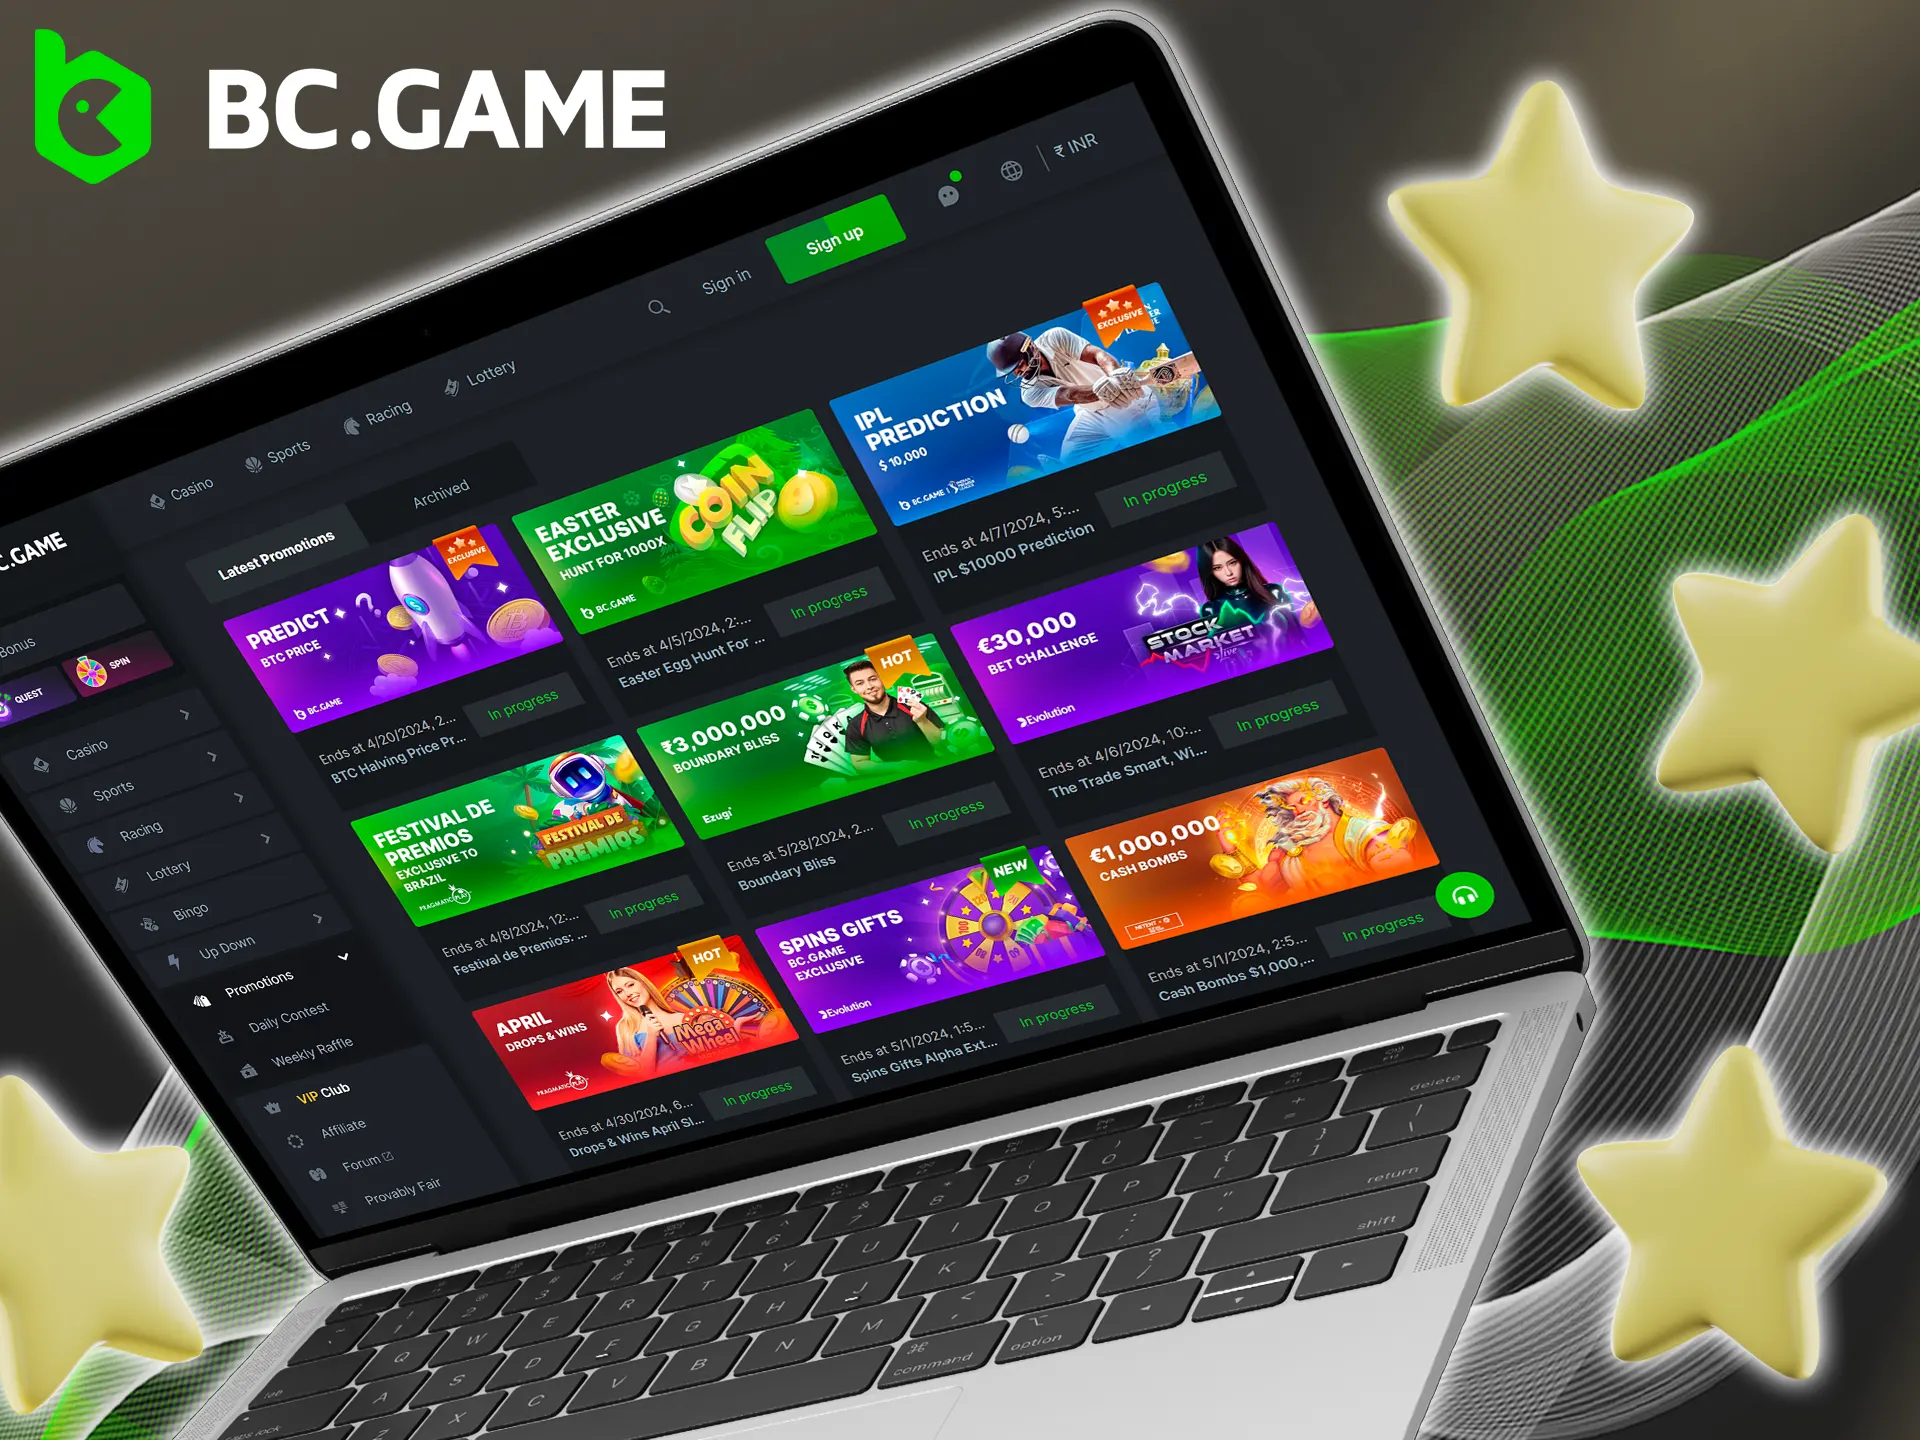 Find out what benefits you'll receive by joining BC Game.